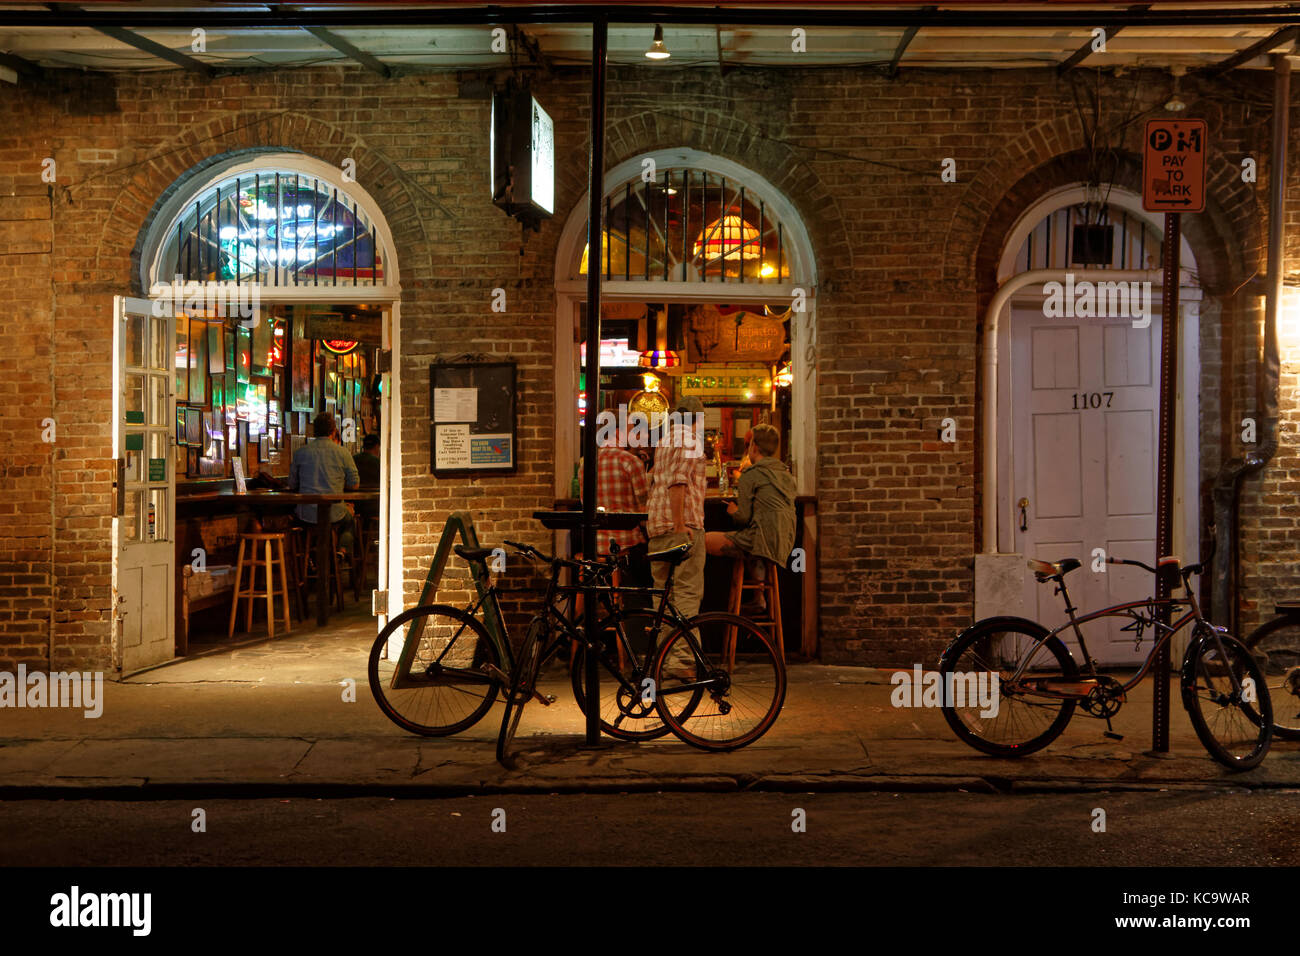 NEW ORLEANS, LOUISIANA, May 4, 2015 : Night life on Bourbon Street. Known for its bars and strip clubs, Bourbon Street's history provides a rich insig Stock Photo